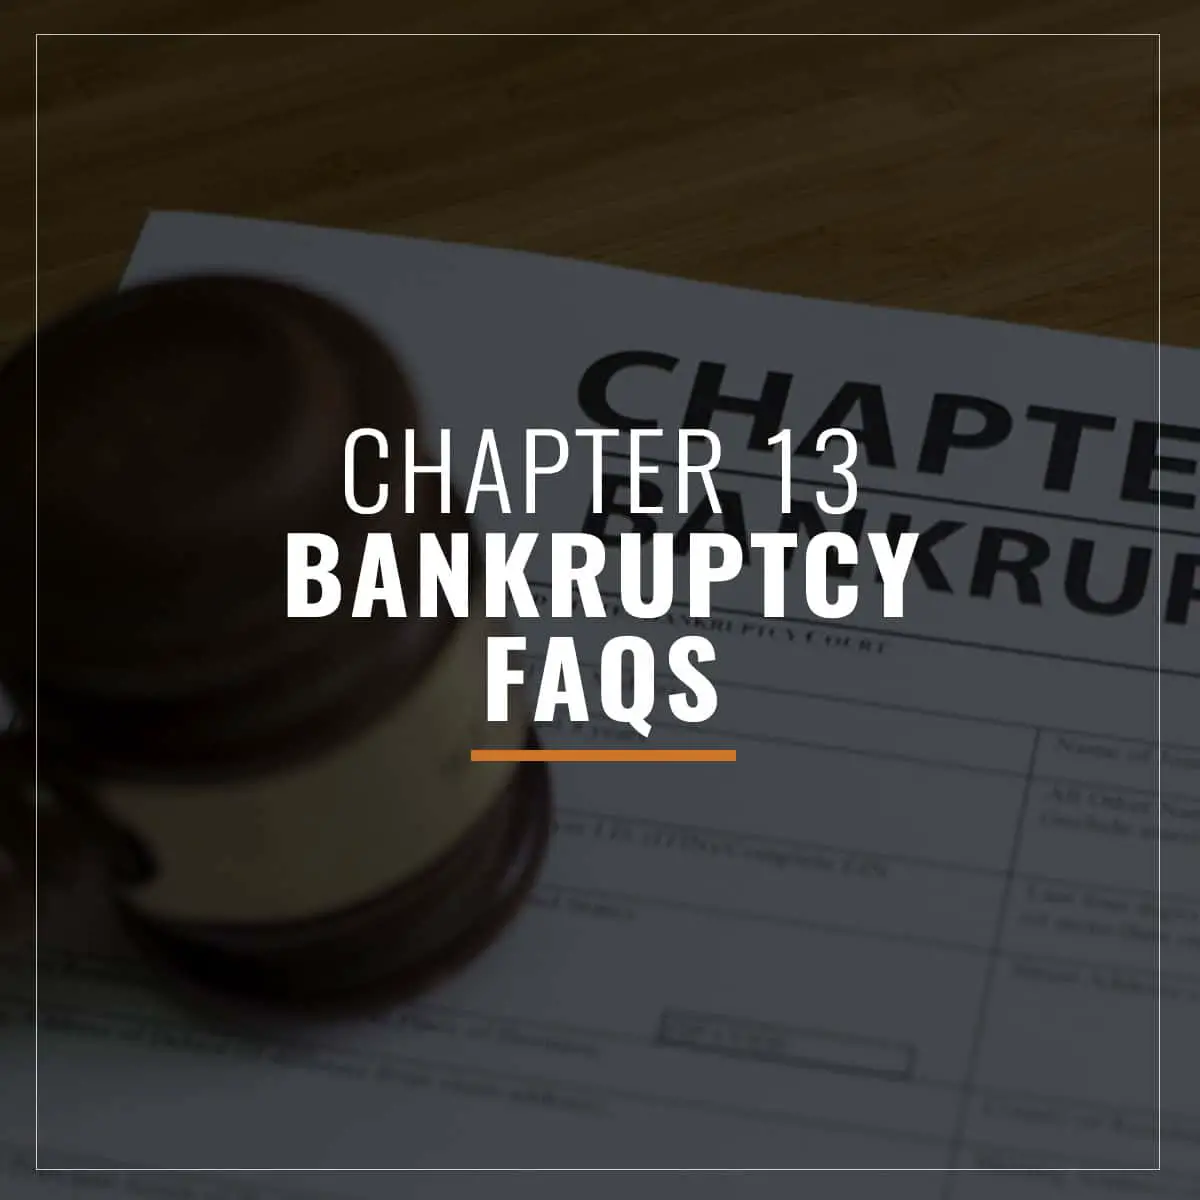 Chapter 13 Bankruptcy FAQS